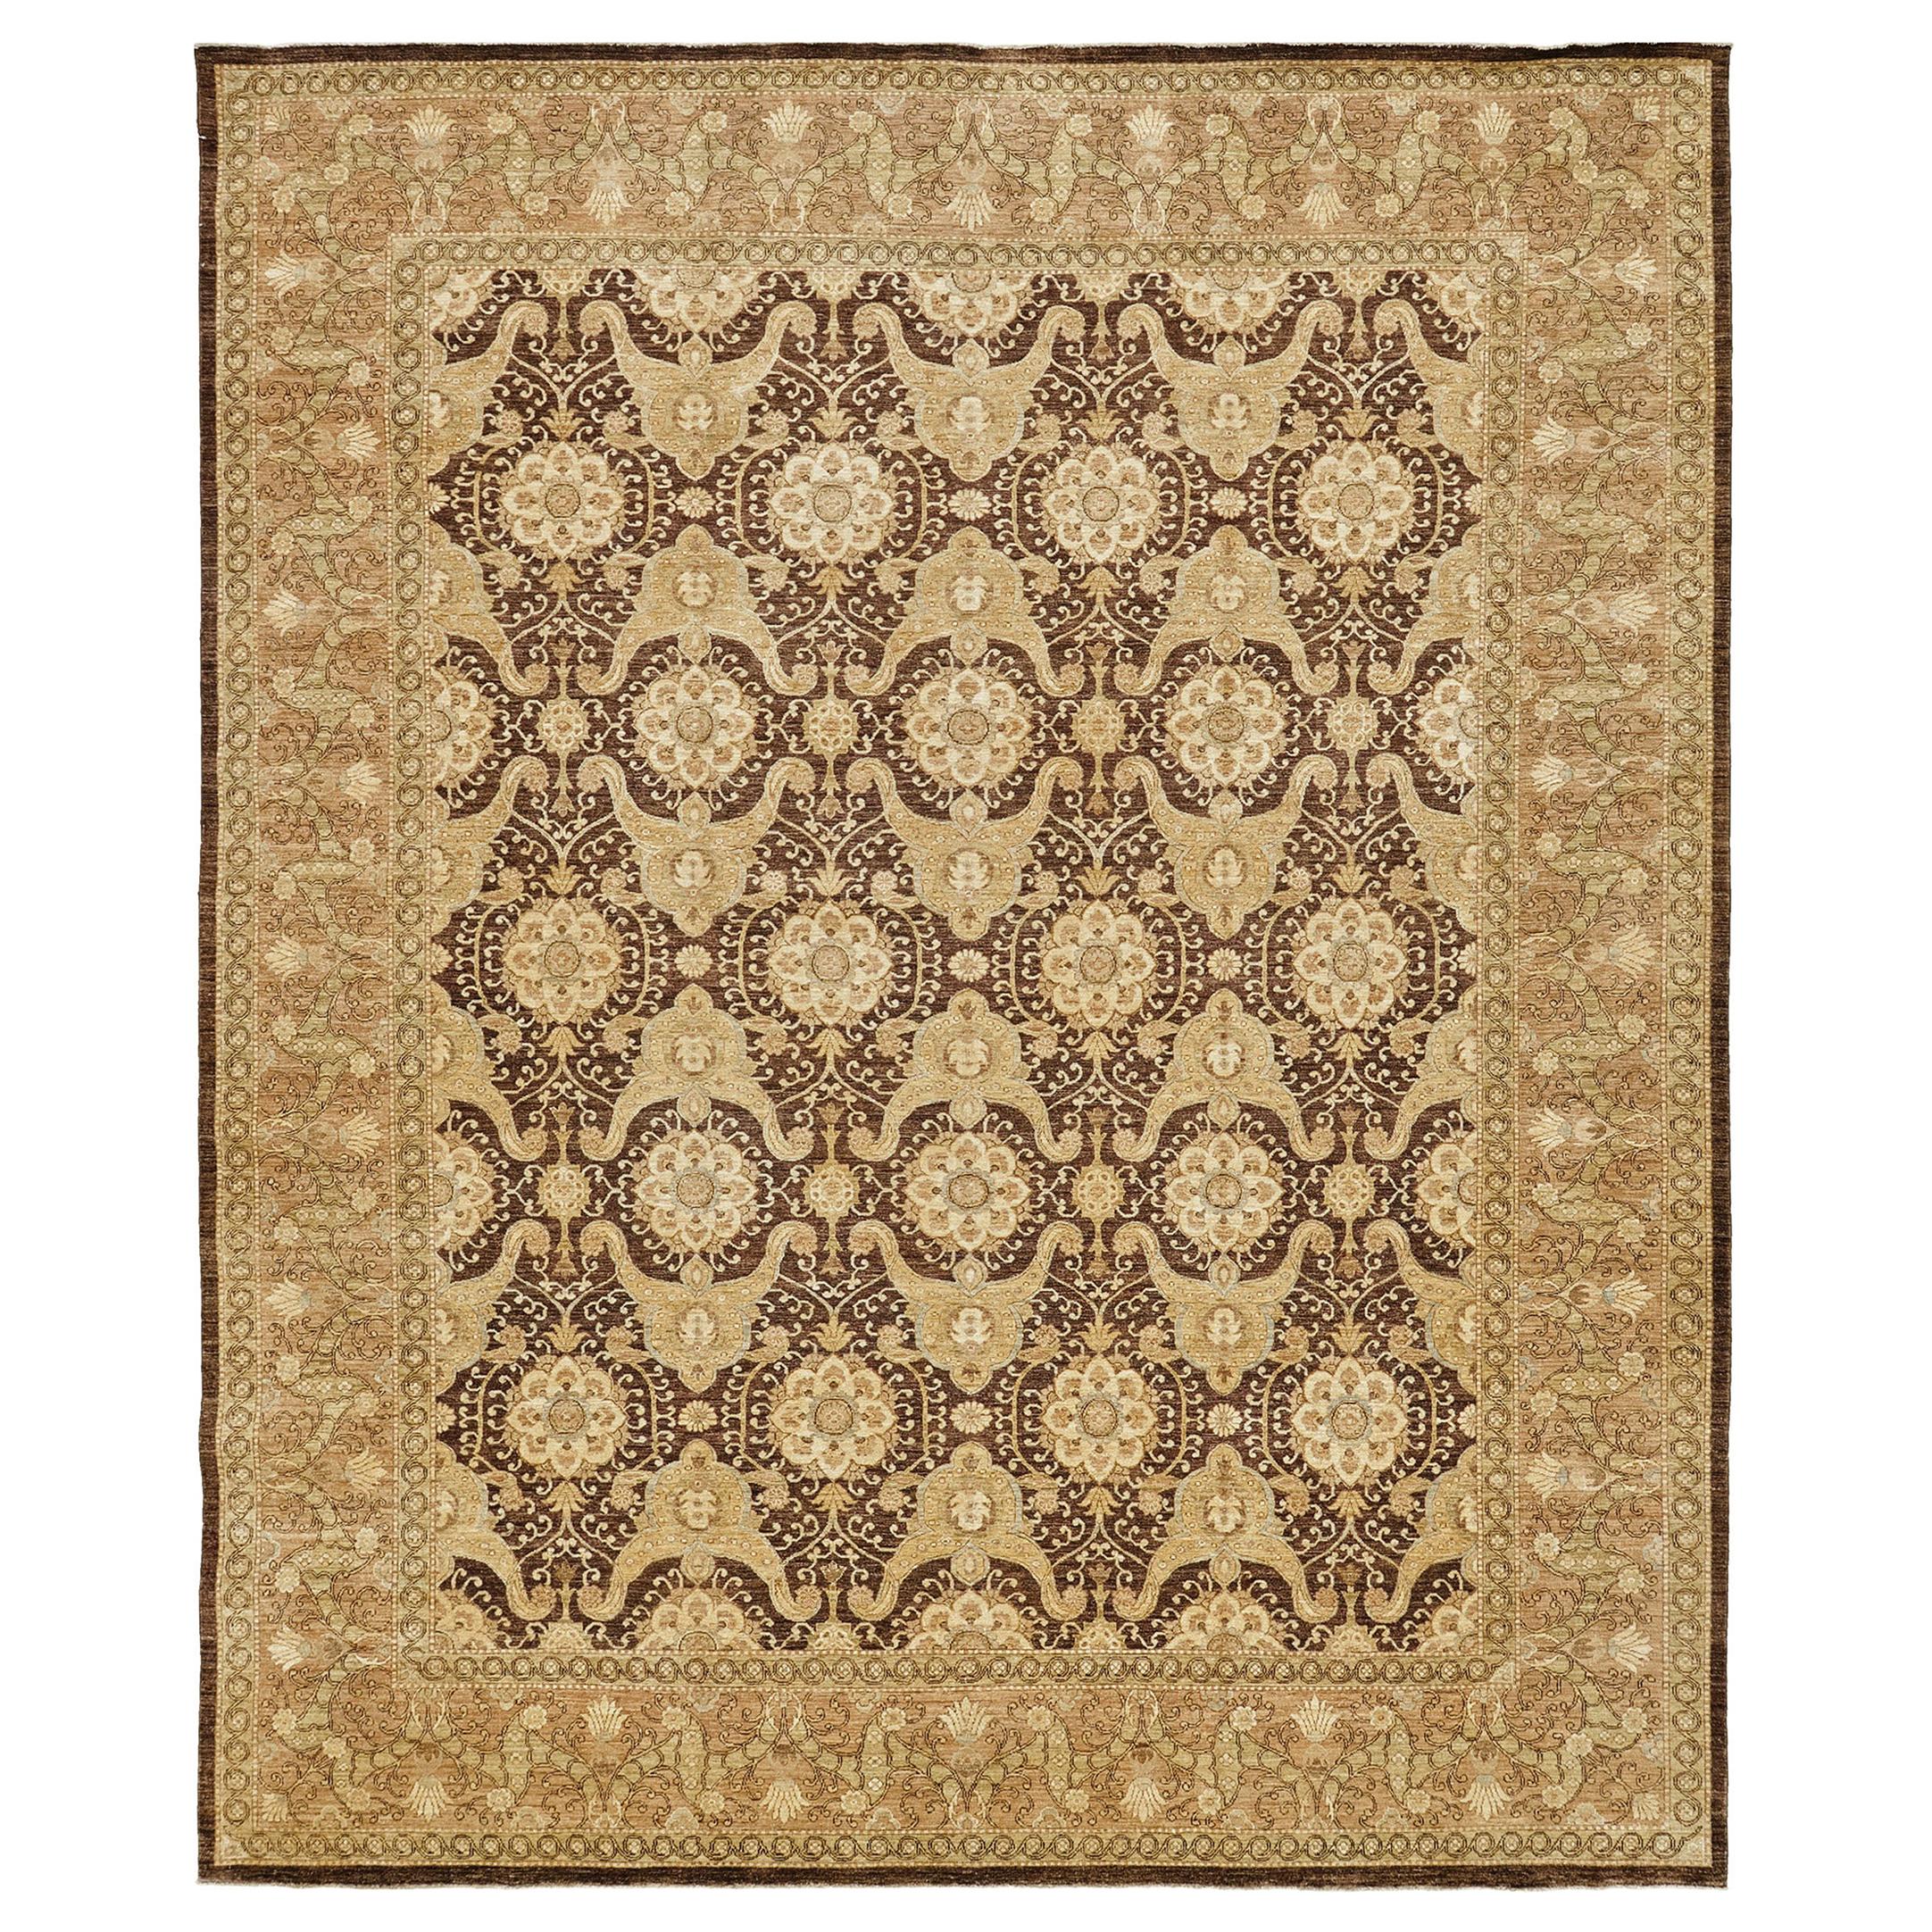 Natural Dye Agra Design Rug, Bliss Collection from Mehraban